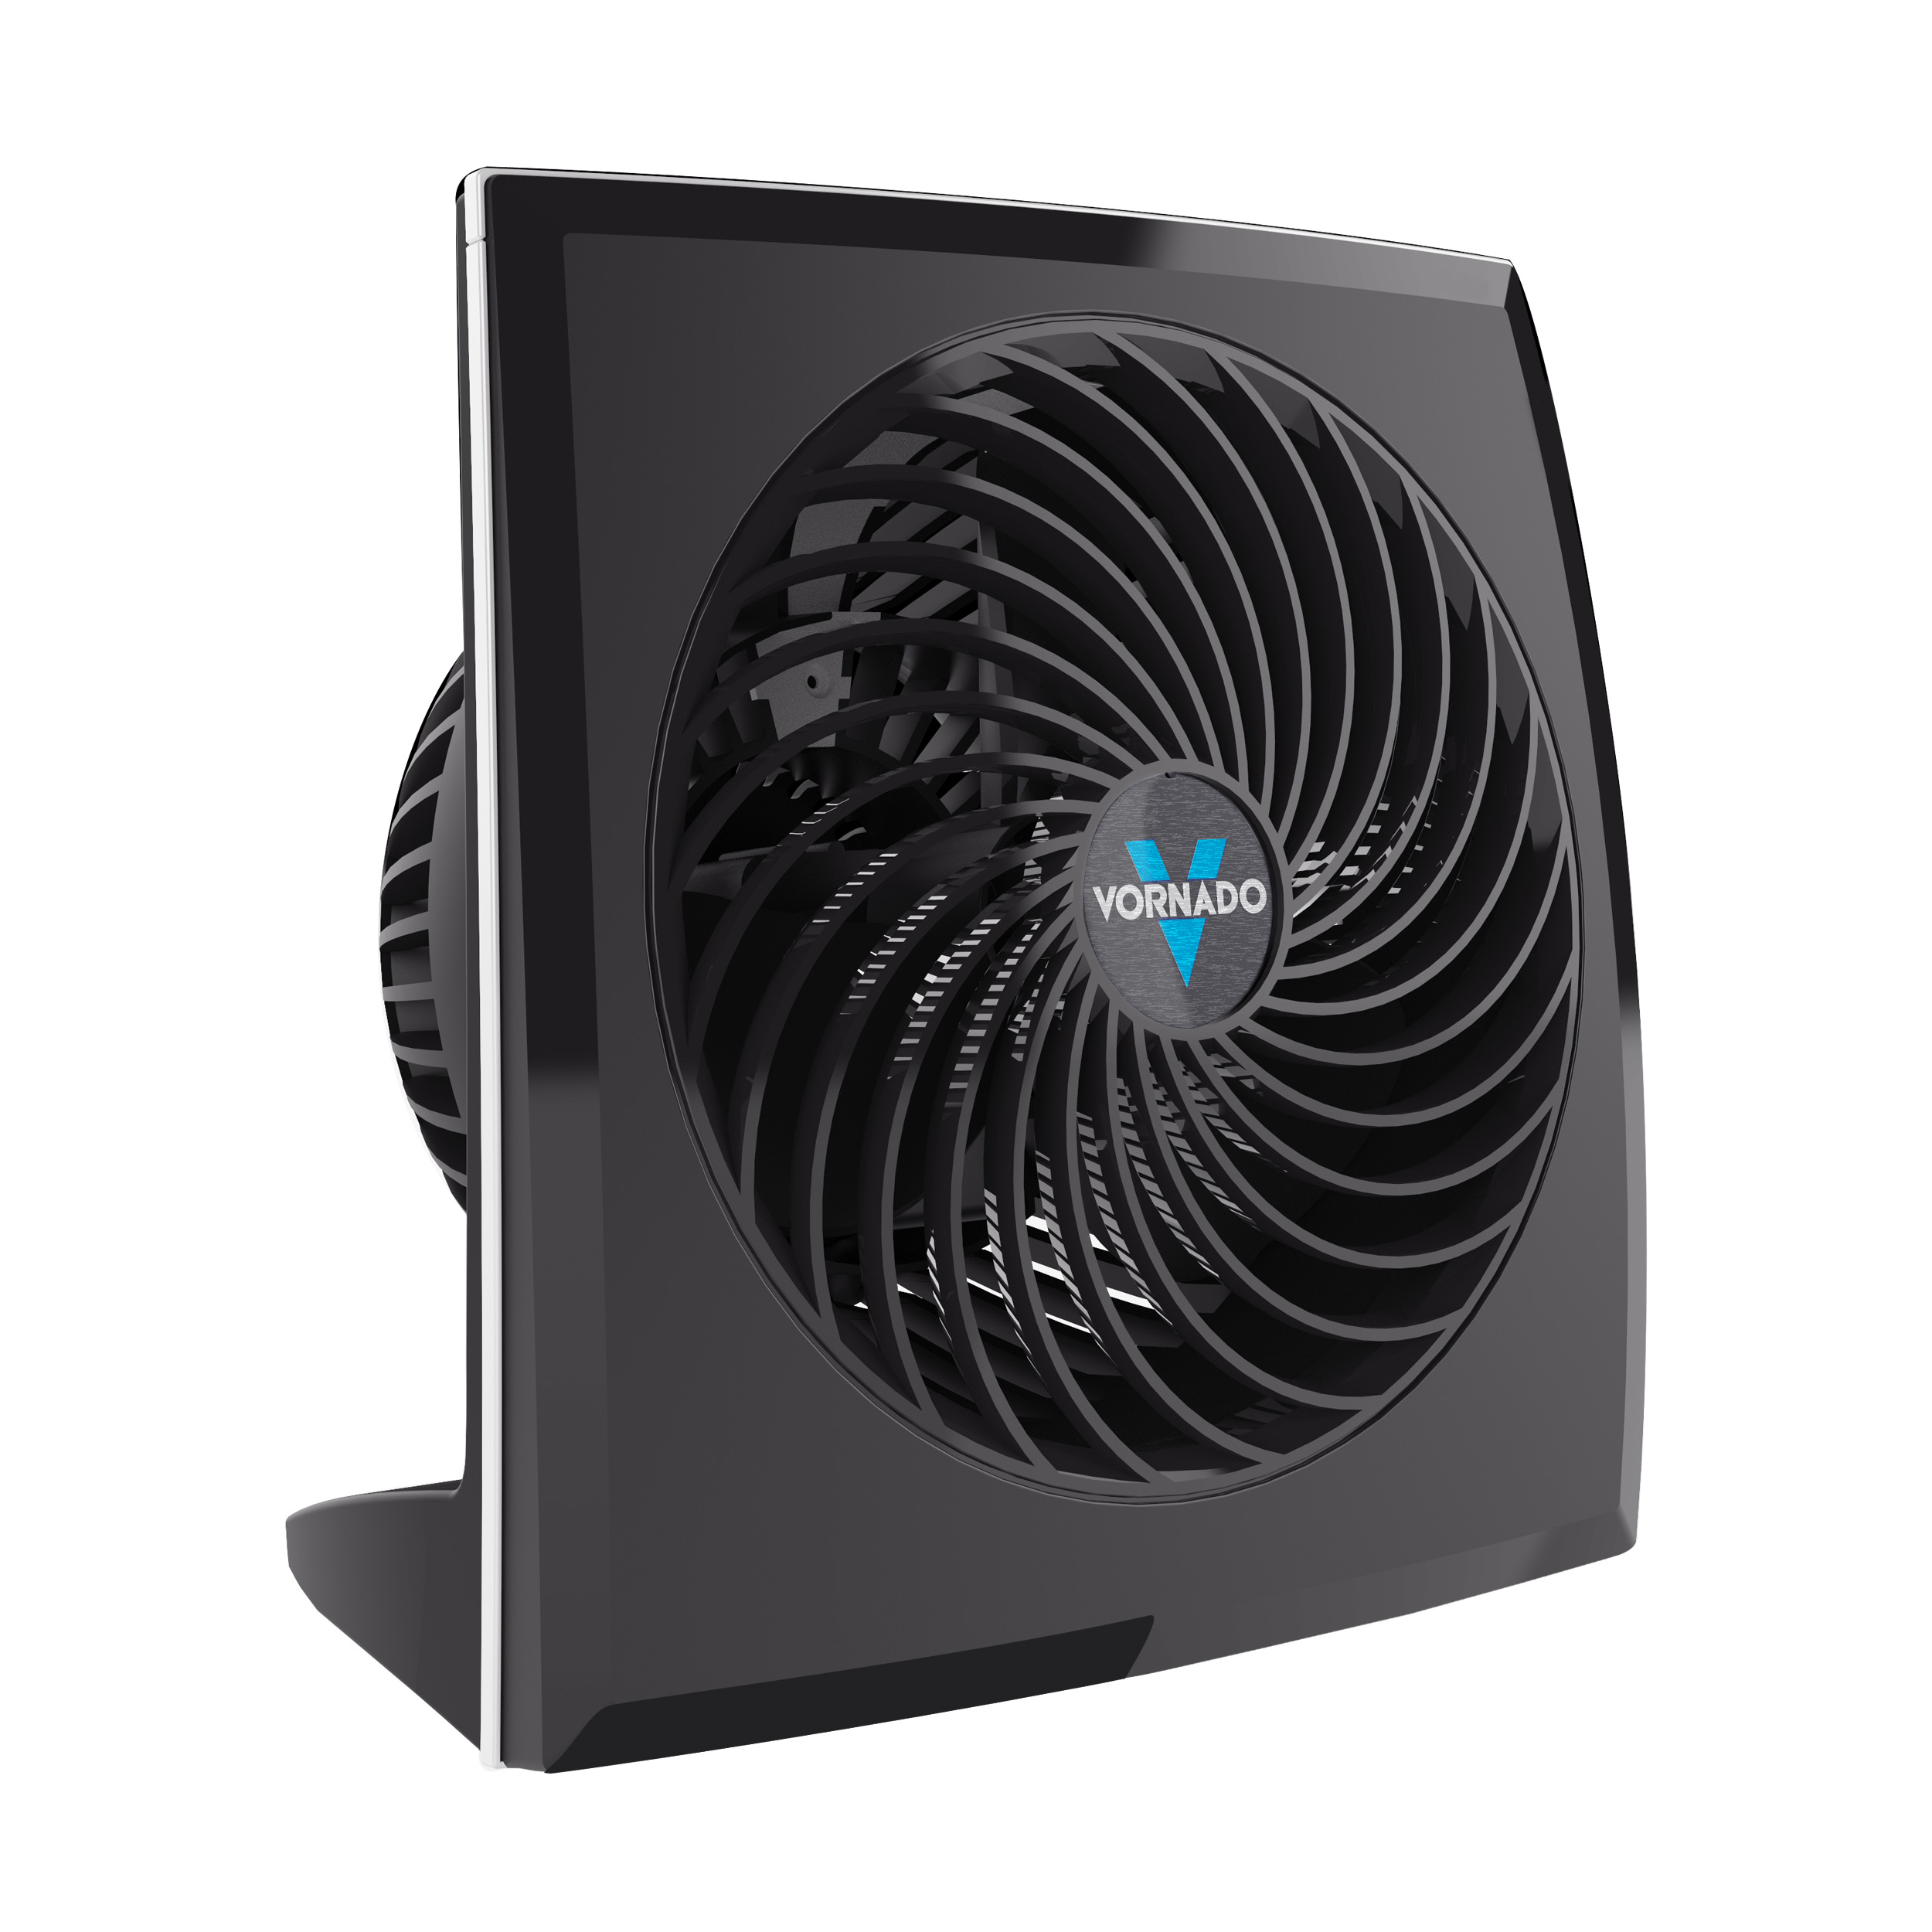 Vornado 573 Small Flat Compact Panel Whole Room Circulator Fan, 10" Height (New) - image 3 of 6